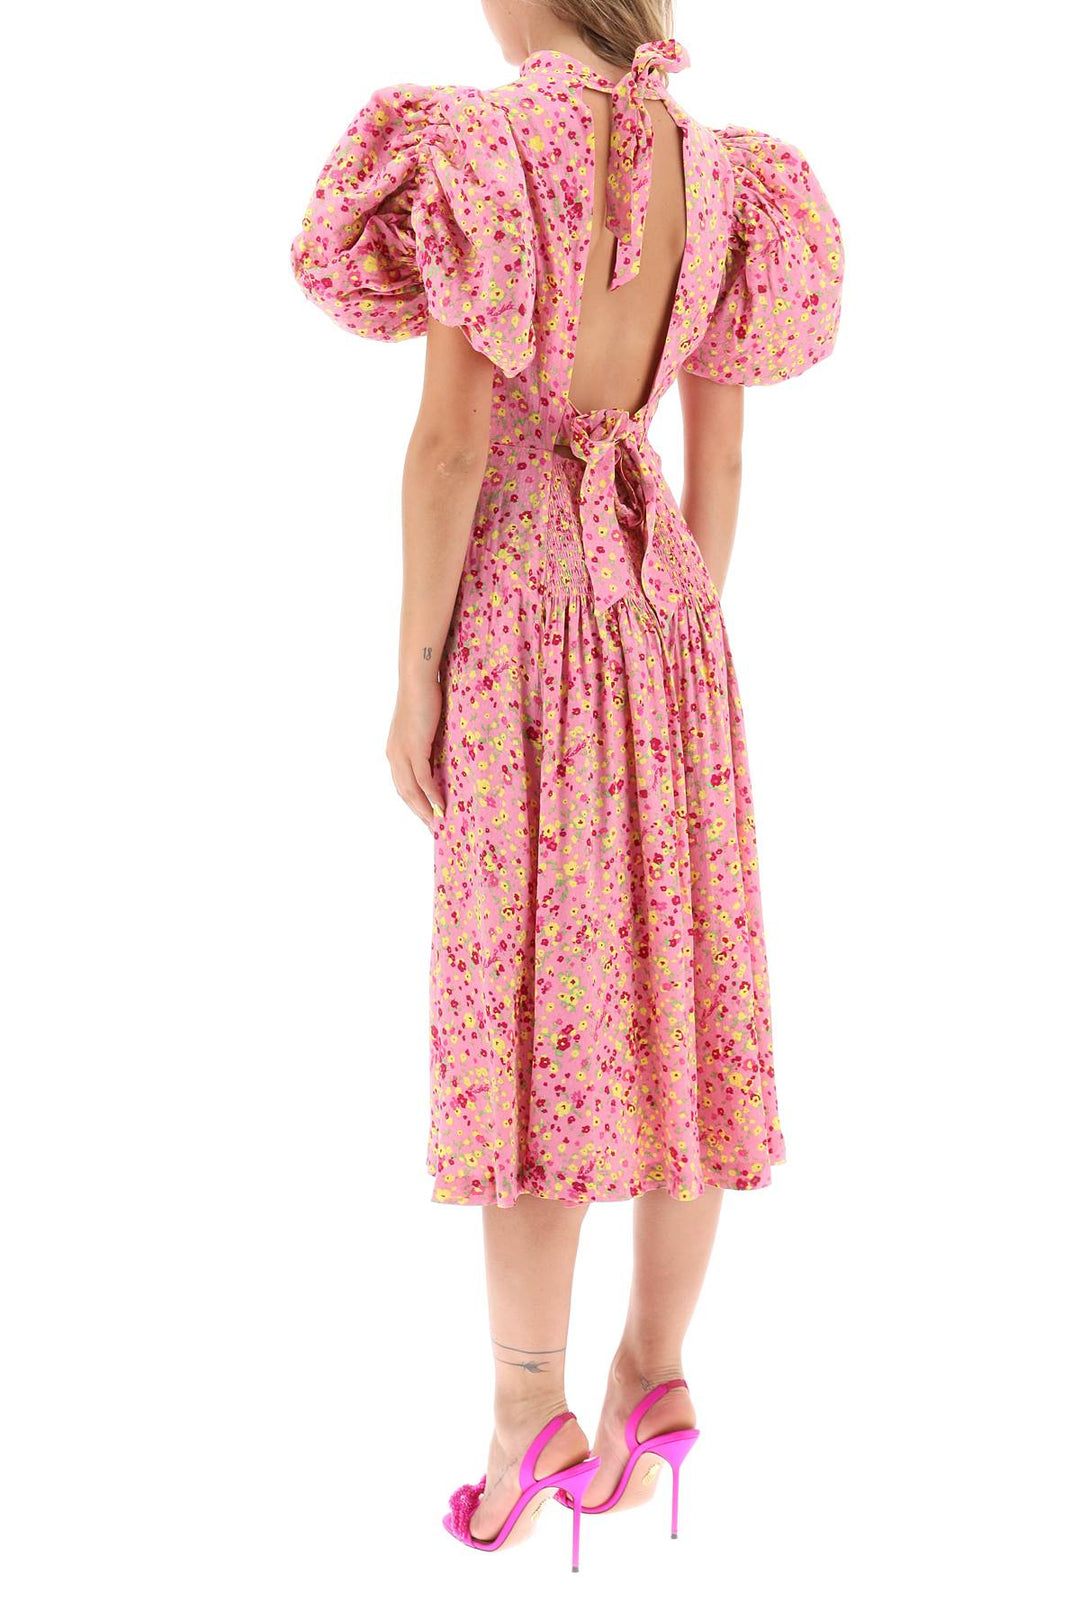 Rotate Jacquard Dress With Puffy Sleeves   Pink